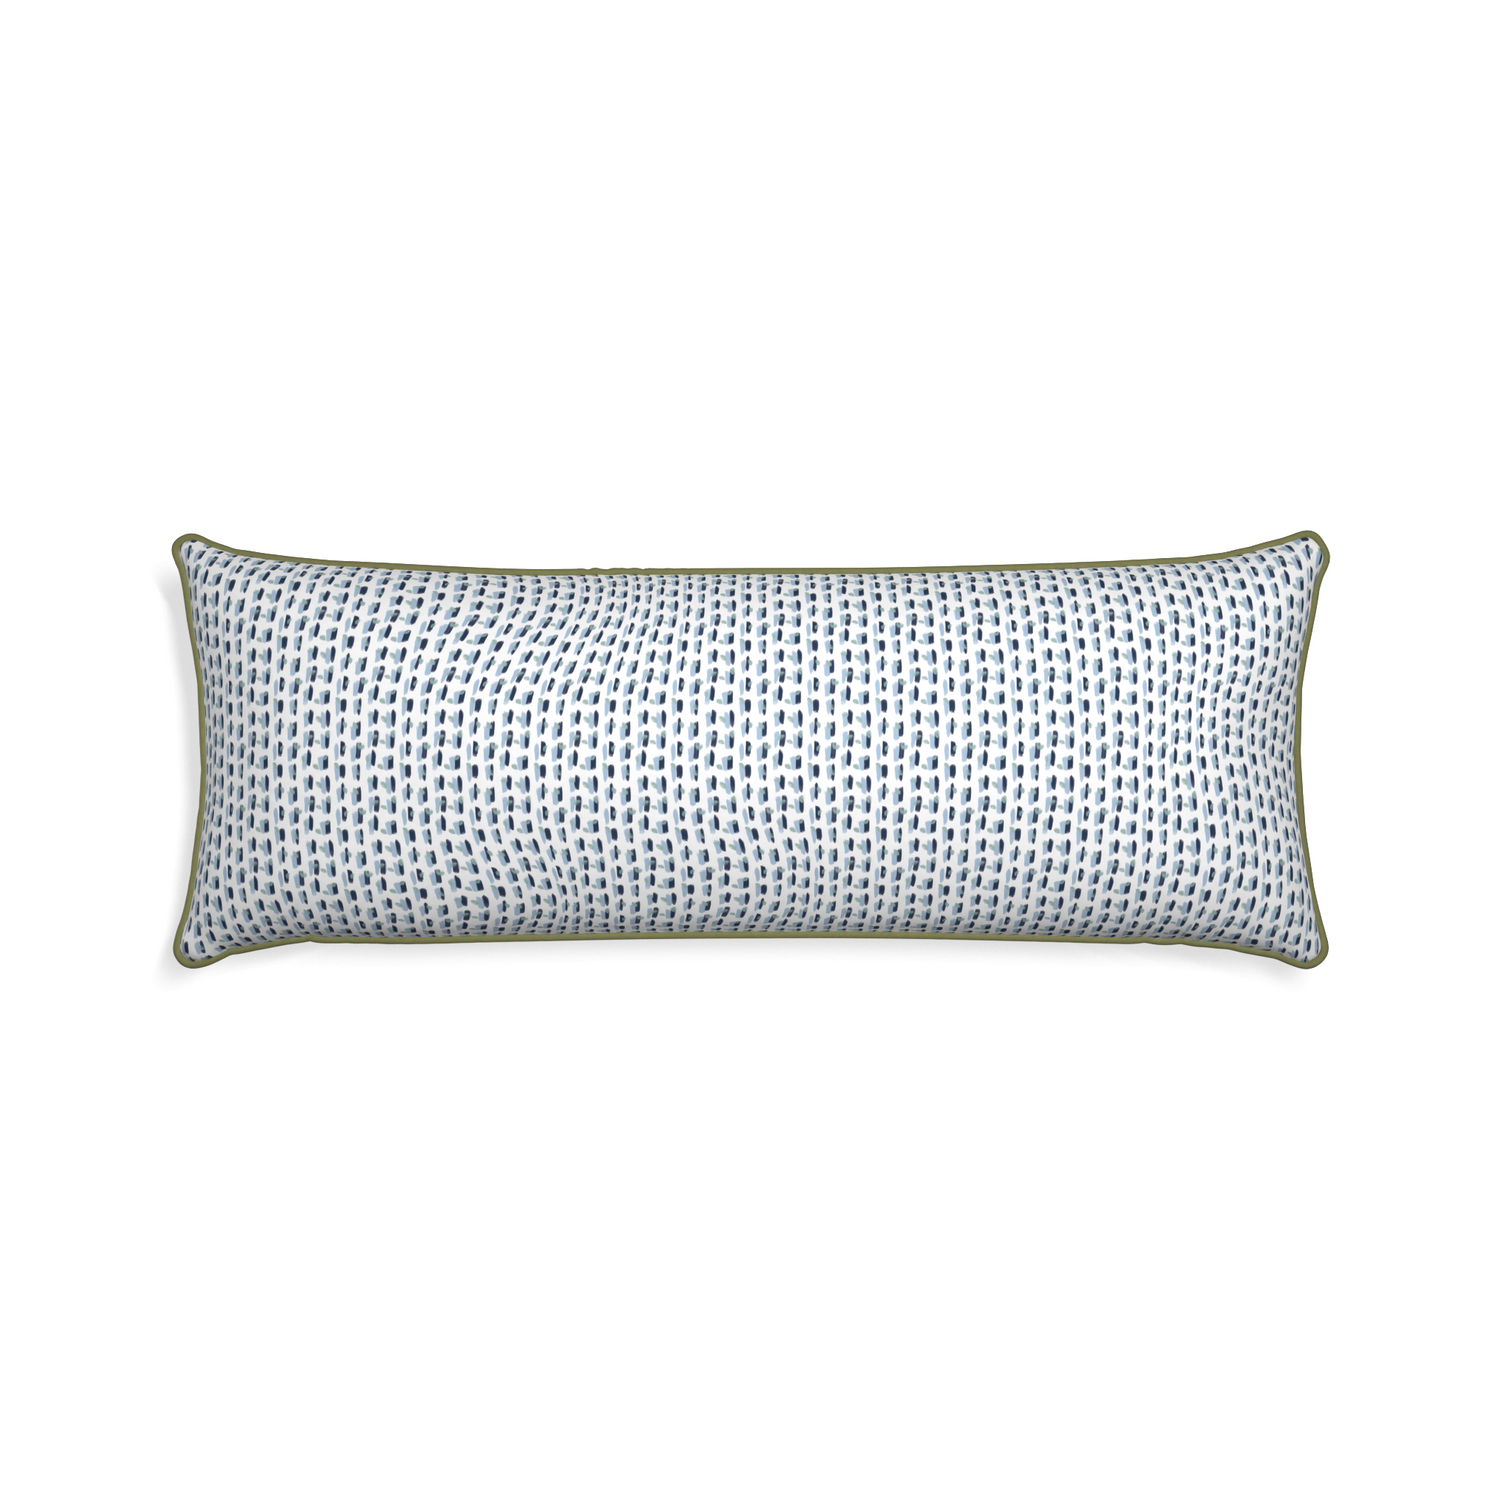 Xl-lumbar poppy blue custom pillow with moss piping on white background